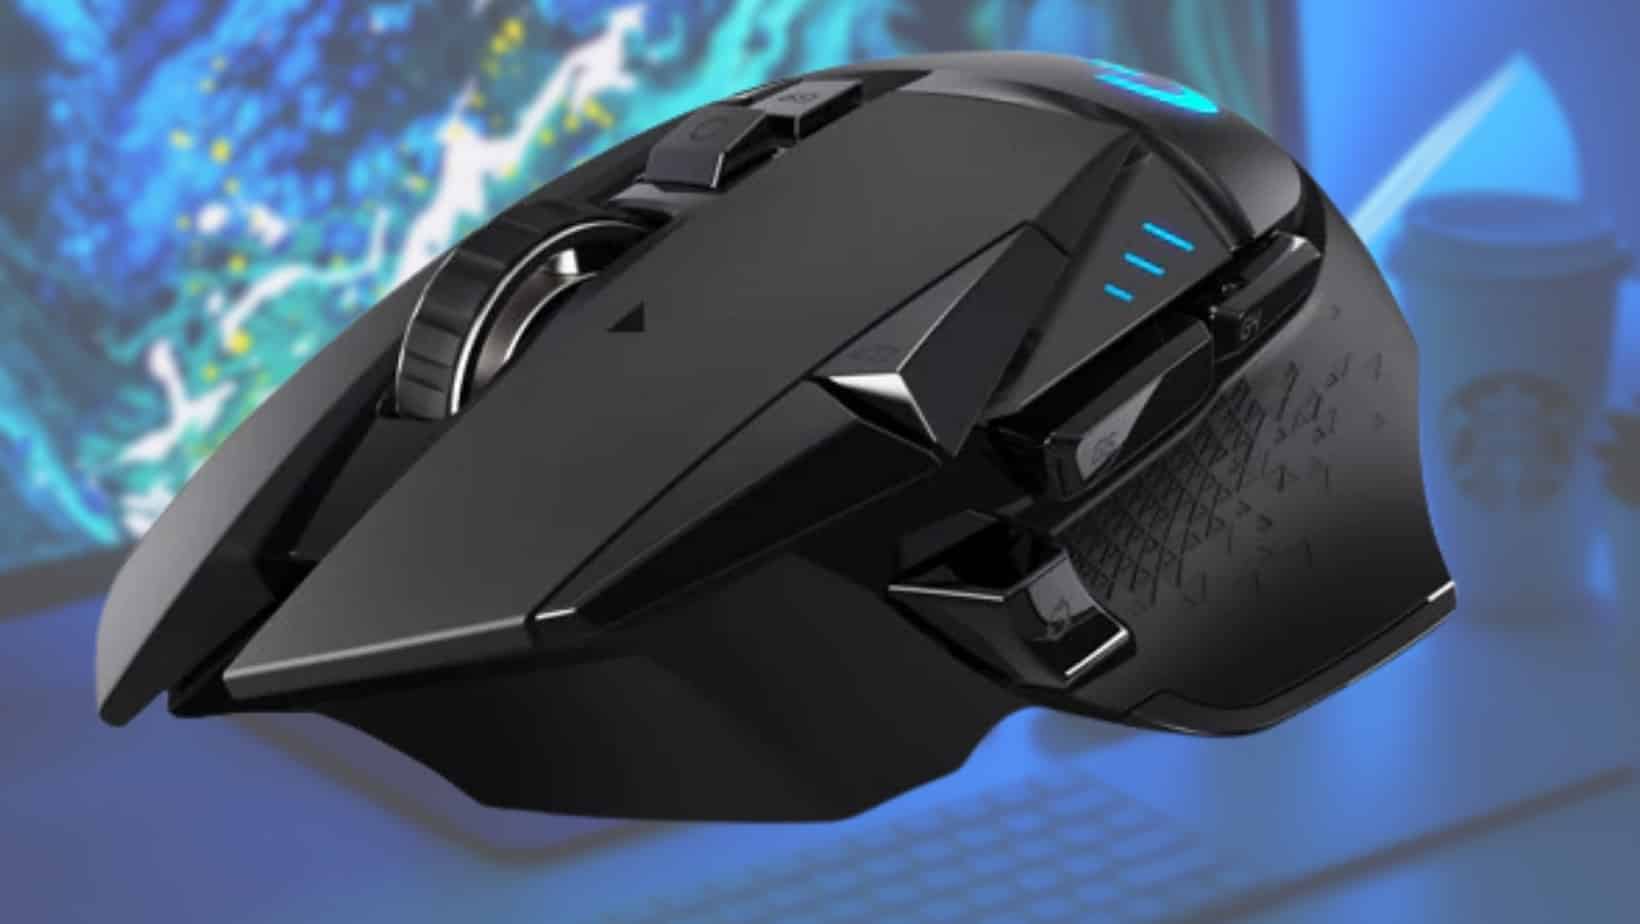 Top 6 Best Gaming Mouse By Professional Gamers 2021